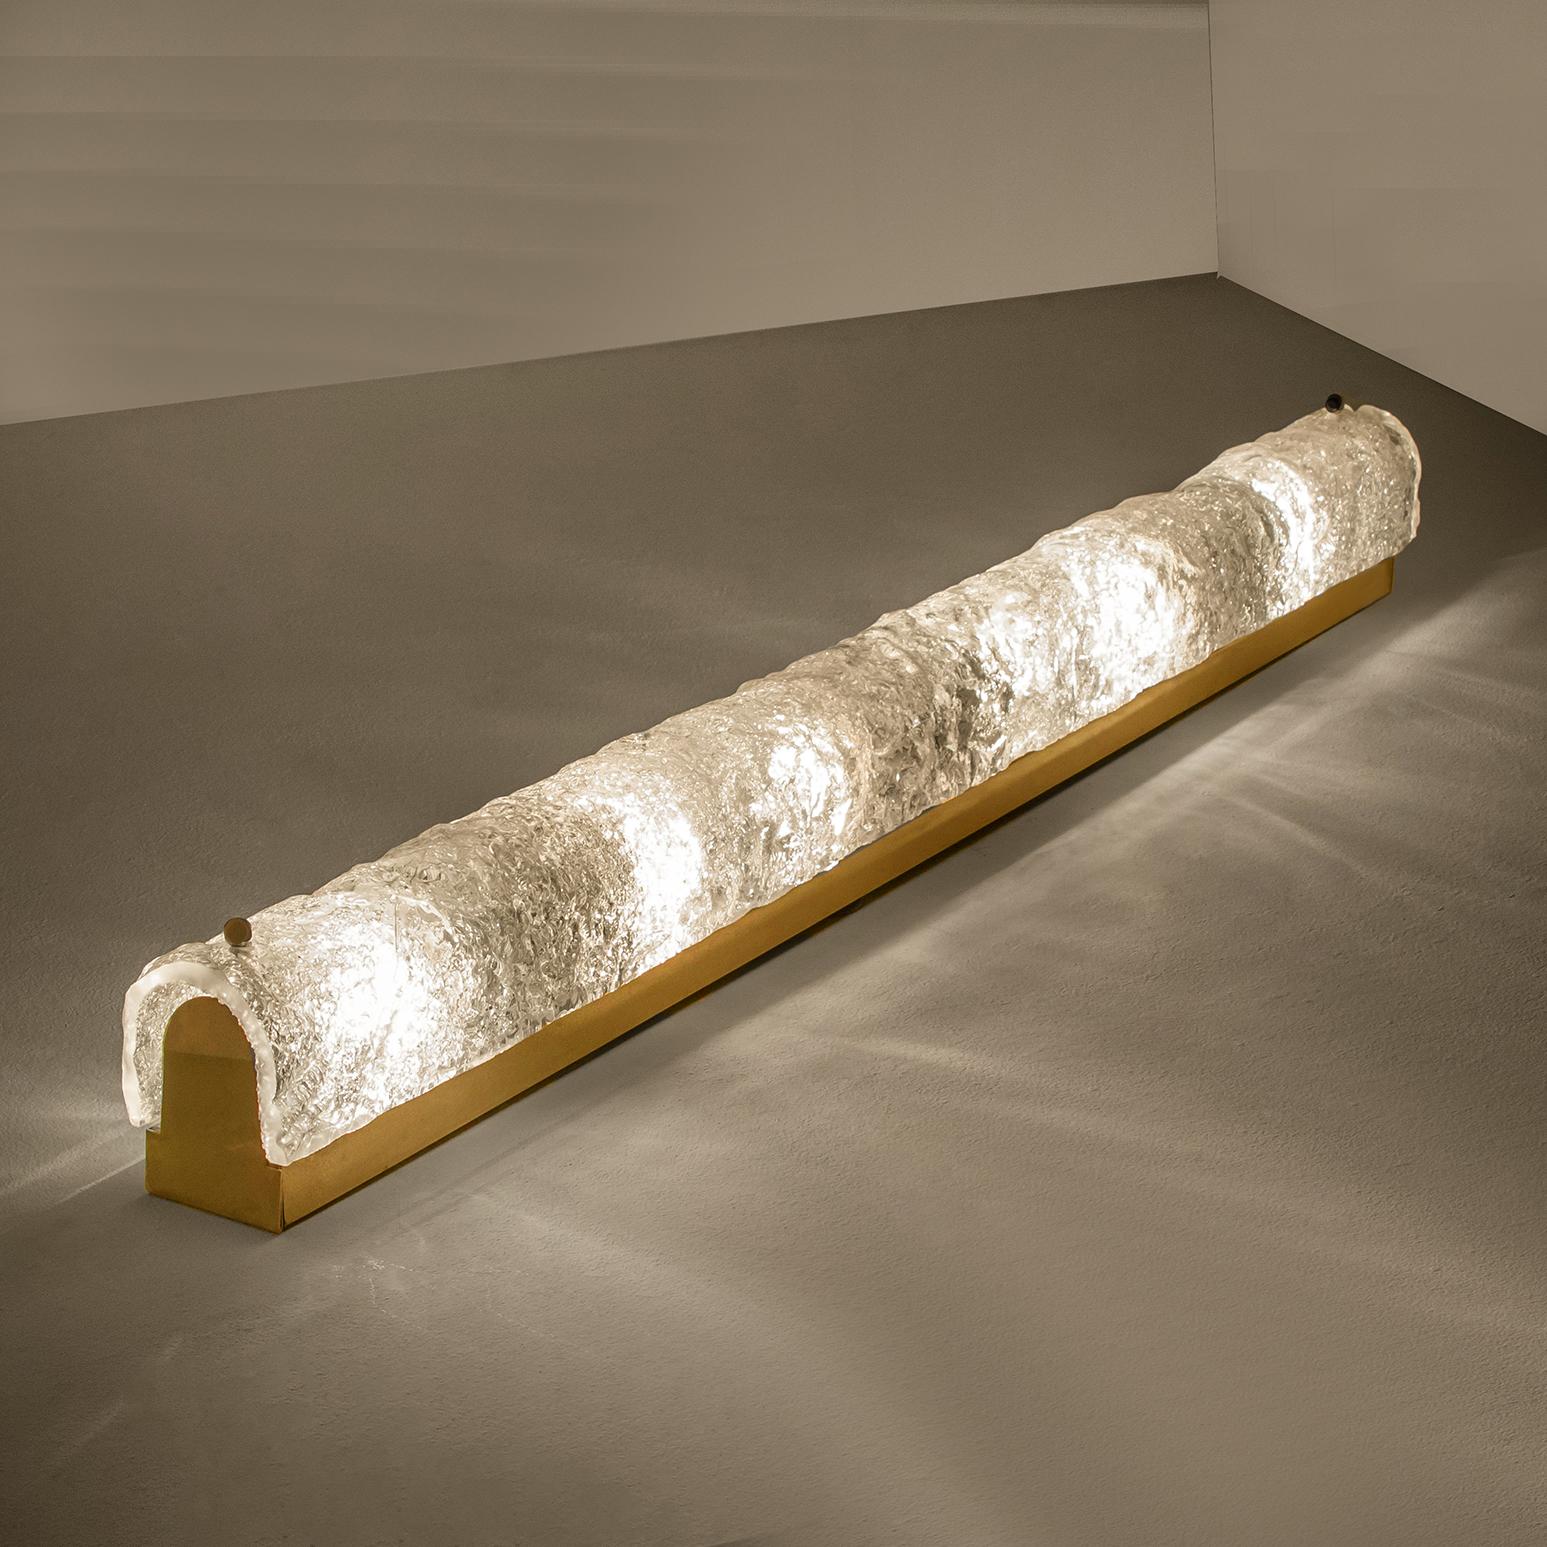 1 0f the 4 large high-end Murano glass on a brass base sconces by Hillebrand, Germany, circa 1960s.
It consists of textured quality clear crystal tubular shade simulating ice on a brass frame.

The design allows this light to be placed either